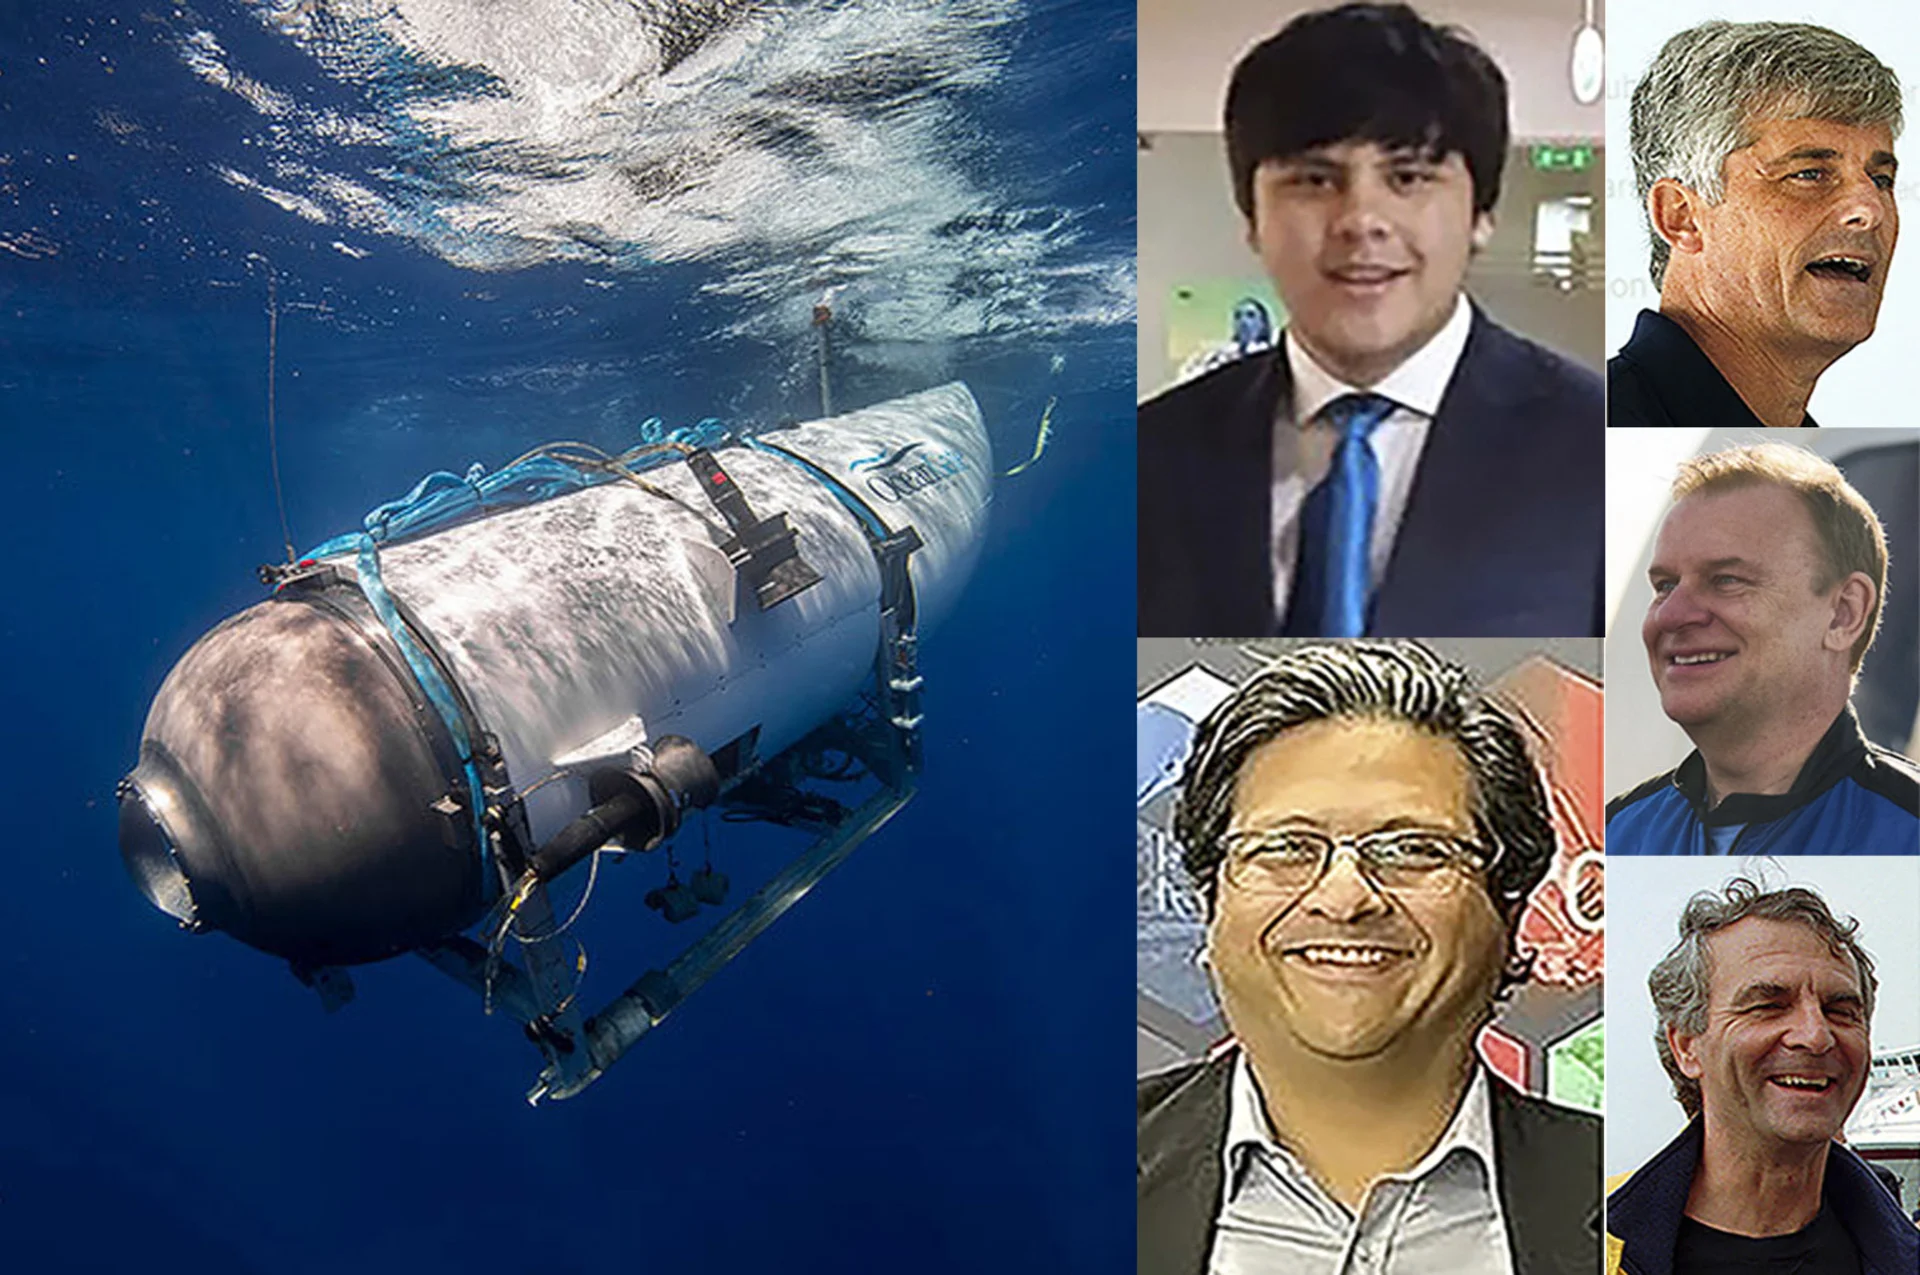 Shahzada Dawood, Suleman Dawood, Paul-Henry Nargeolet, Stockton Rush and Hamish Harding died while on board a submersible that went missing Sunday in the Atlantic.(Associated Press) - Photo by Los Angeles Times at Los Angeles Times